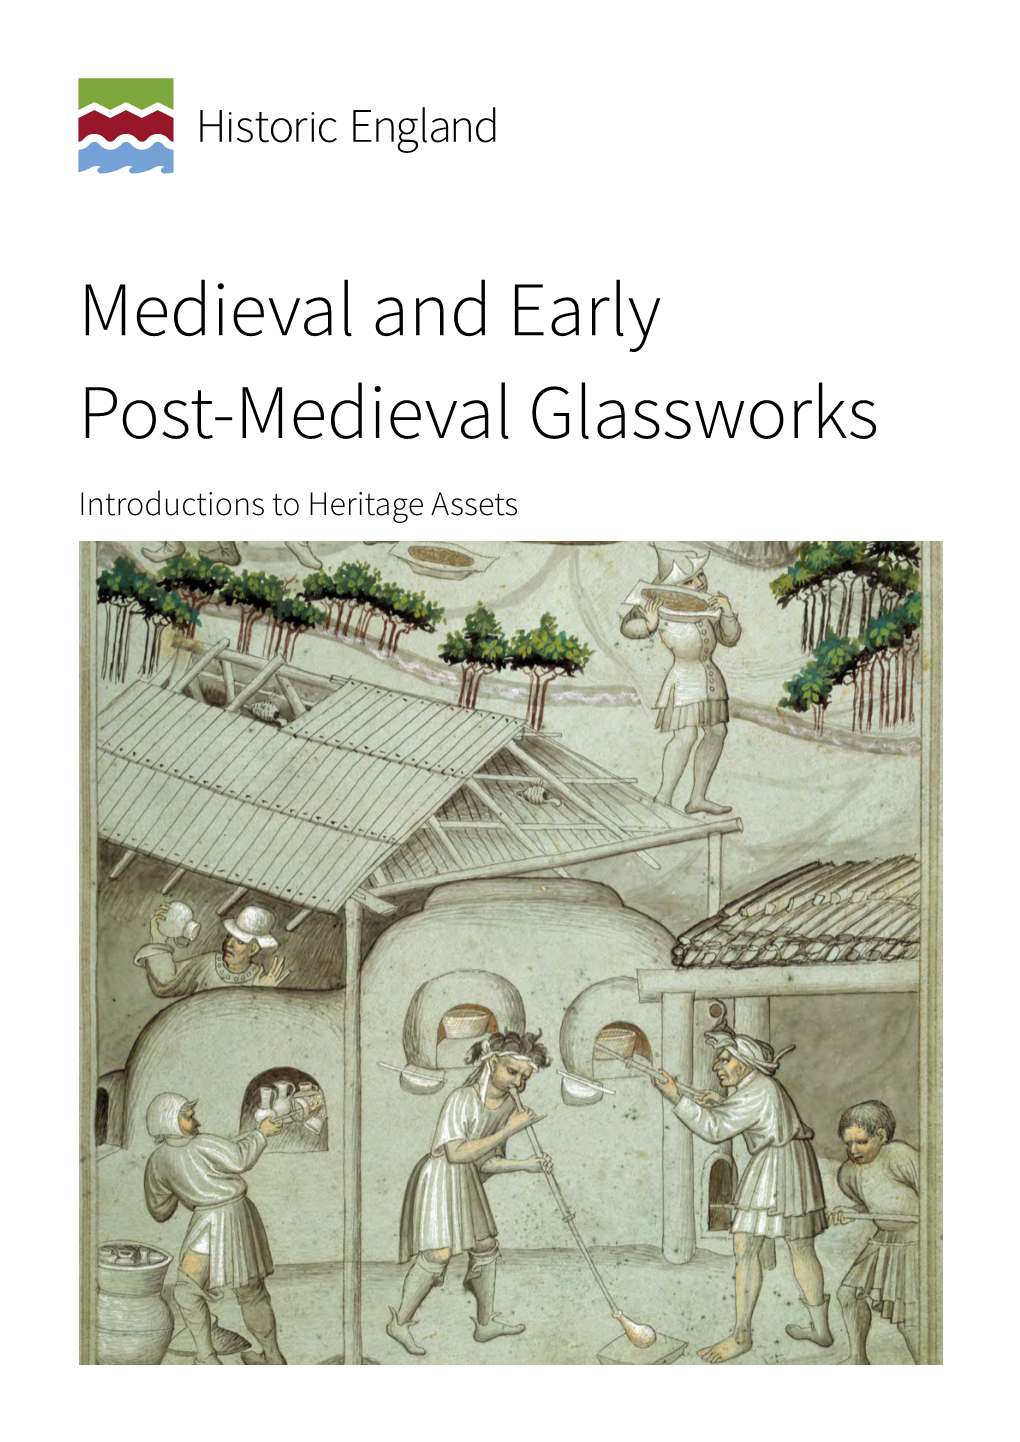 Medieval and Early Post-Medieval Glassworks